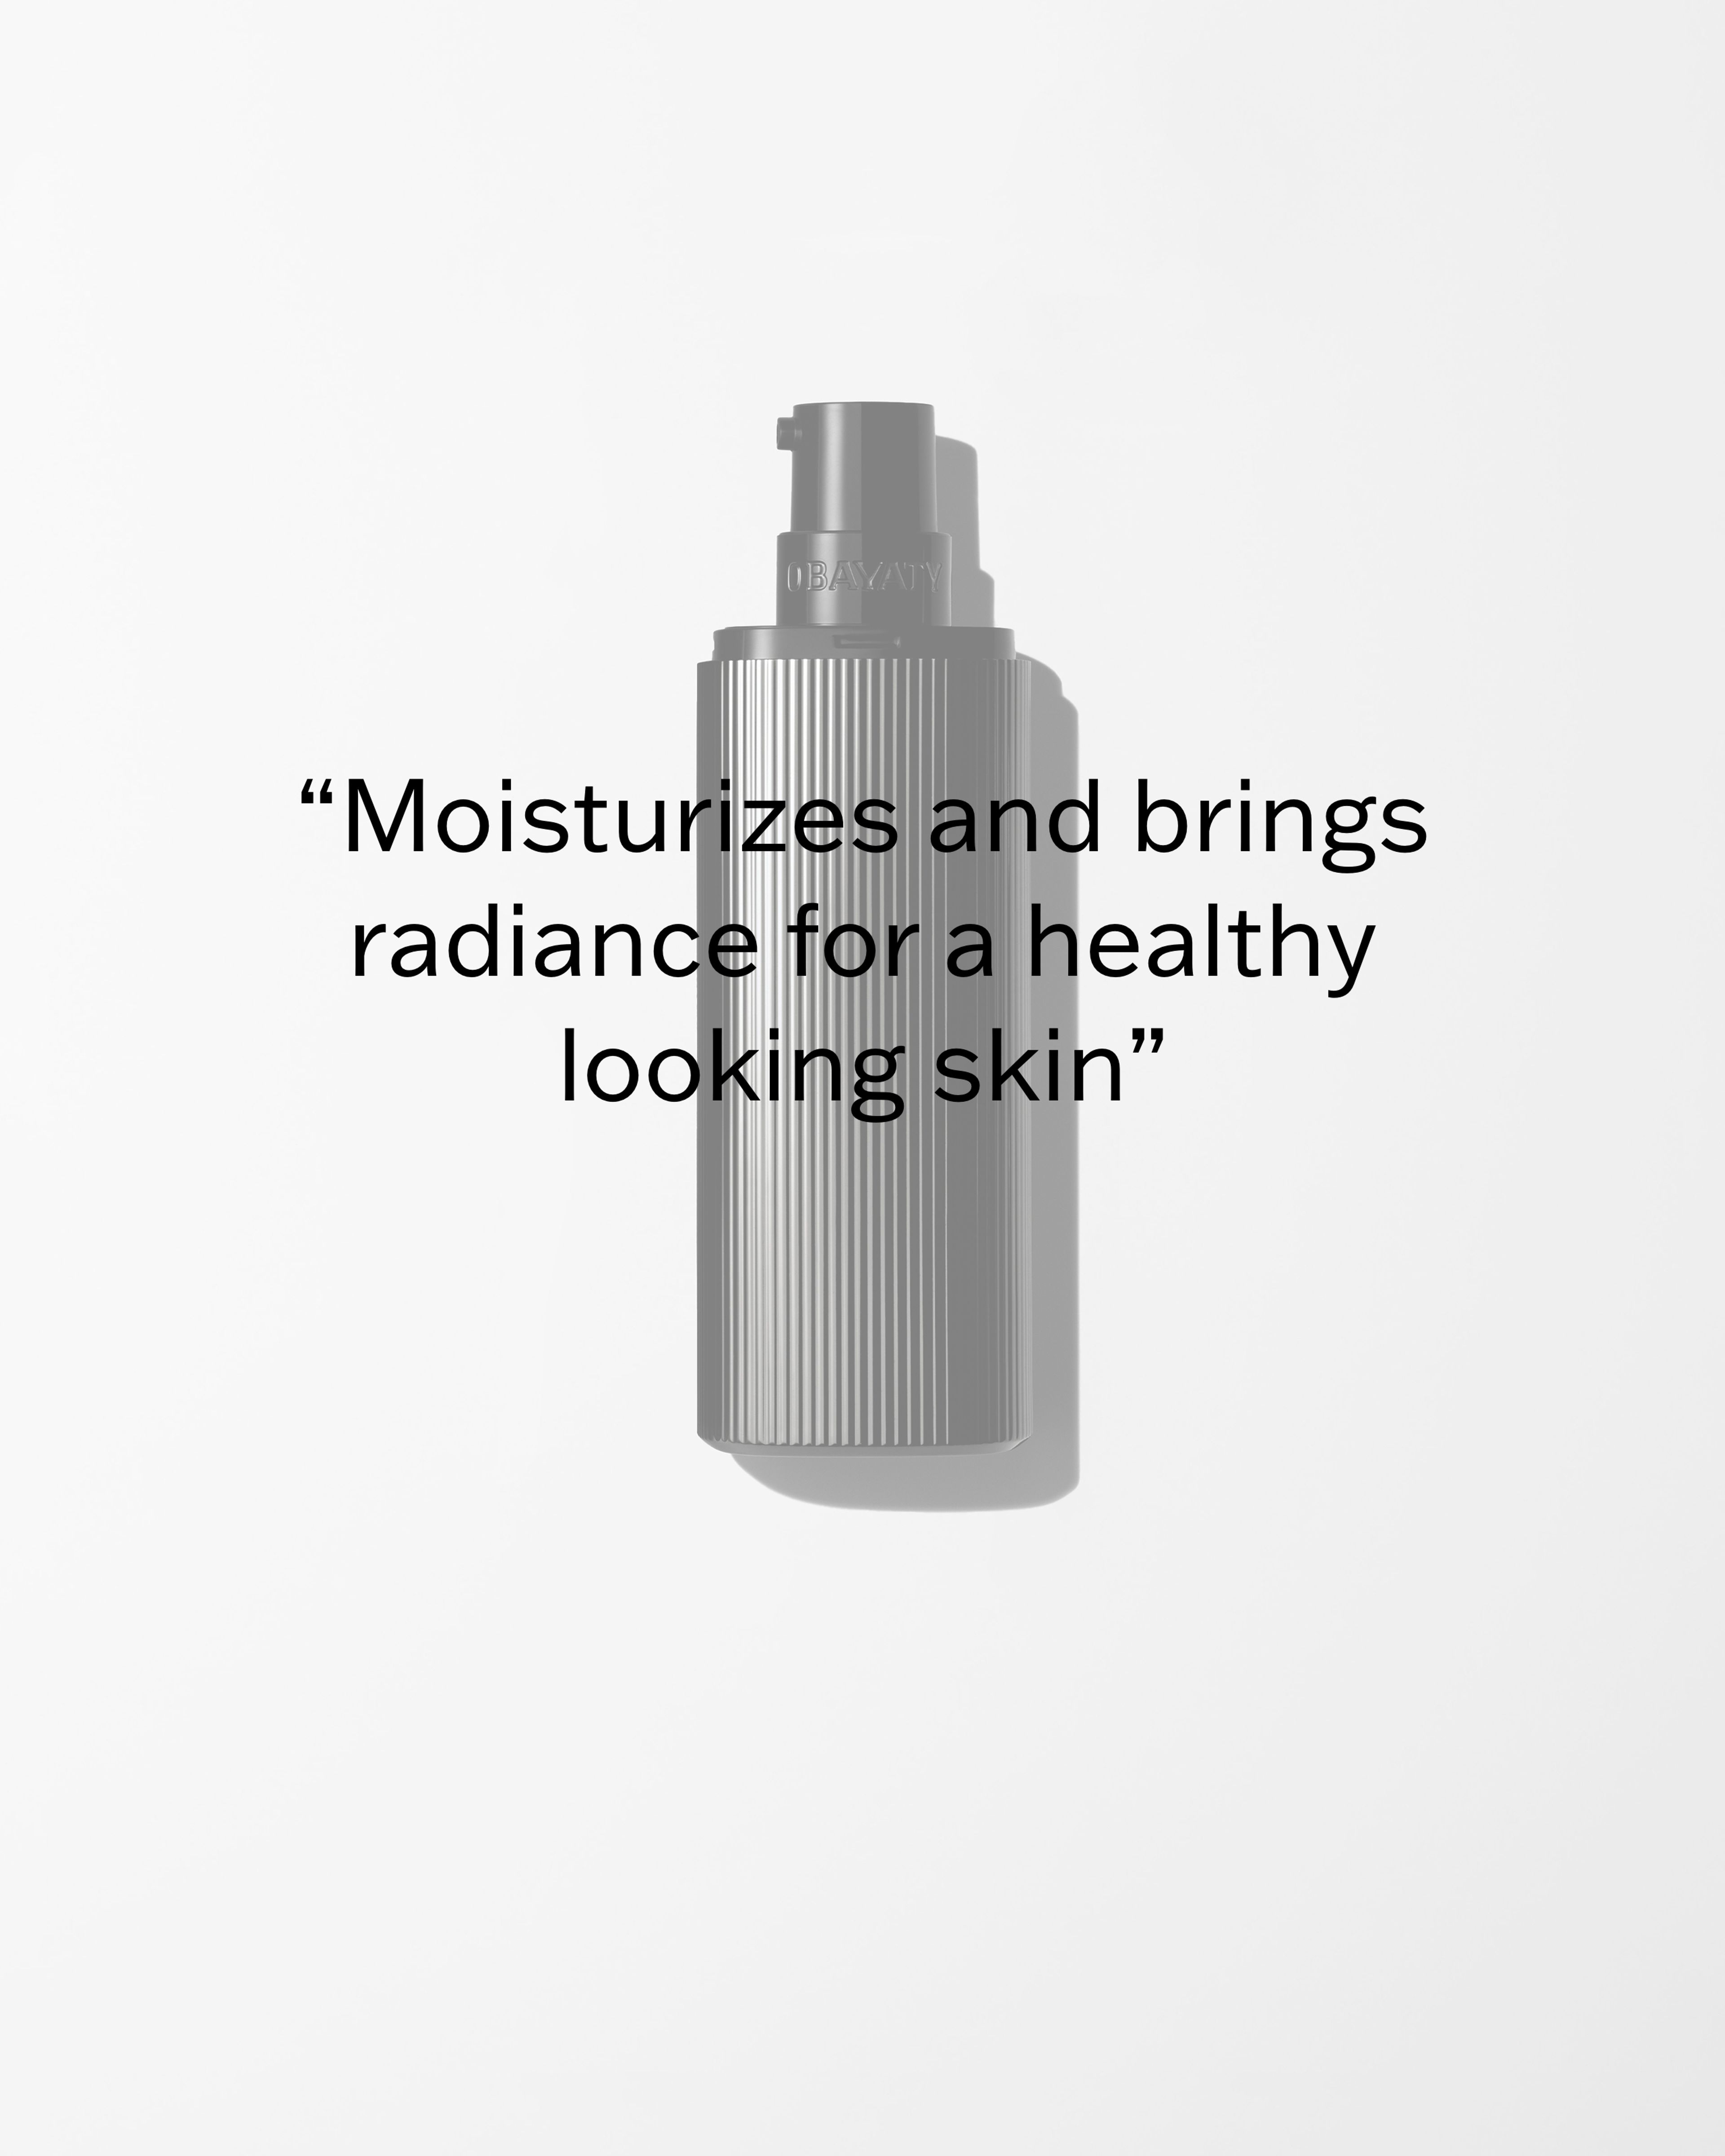 Moisturizer laying on a grey surface